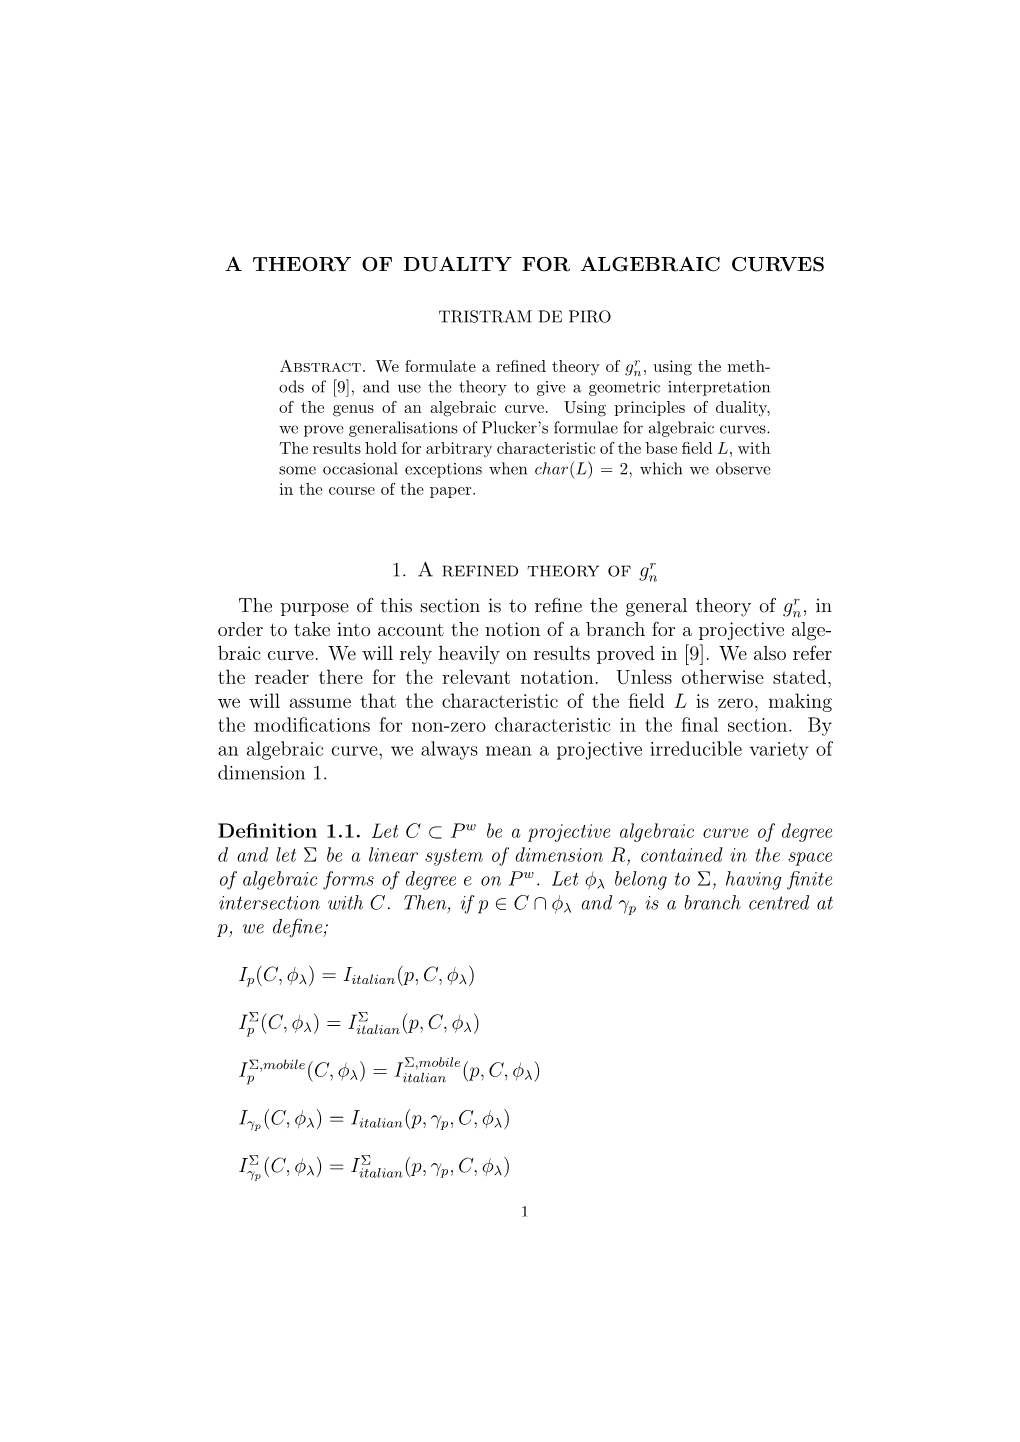 A THEORY of DUALITY for ALGEBRAIC CURVES 1. a Refined